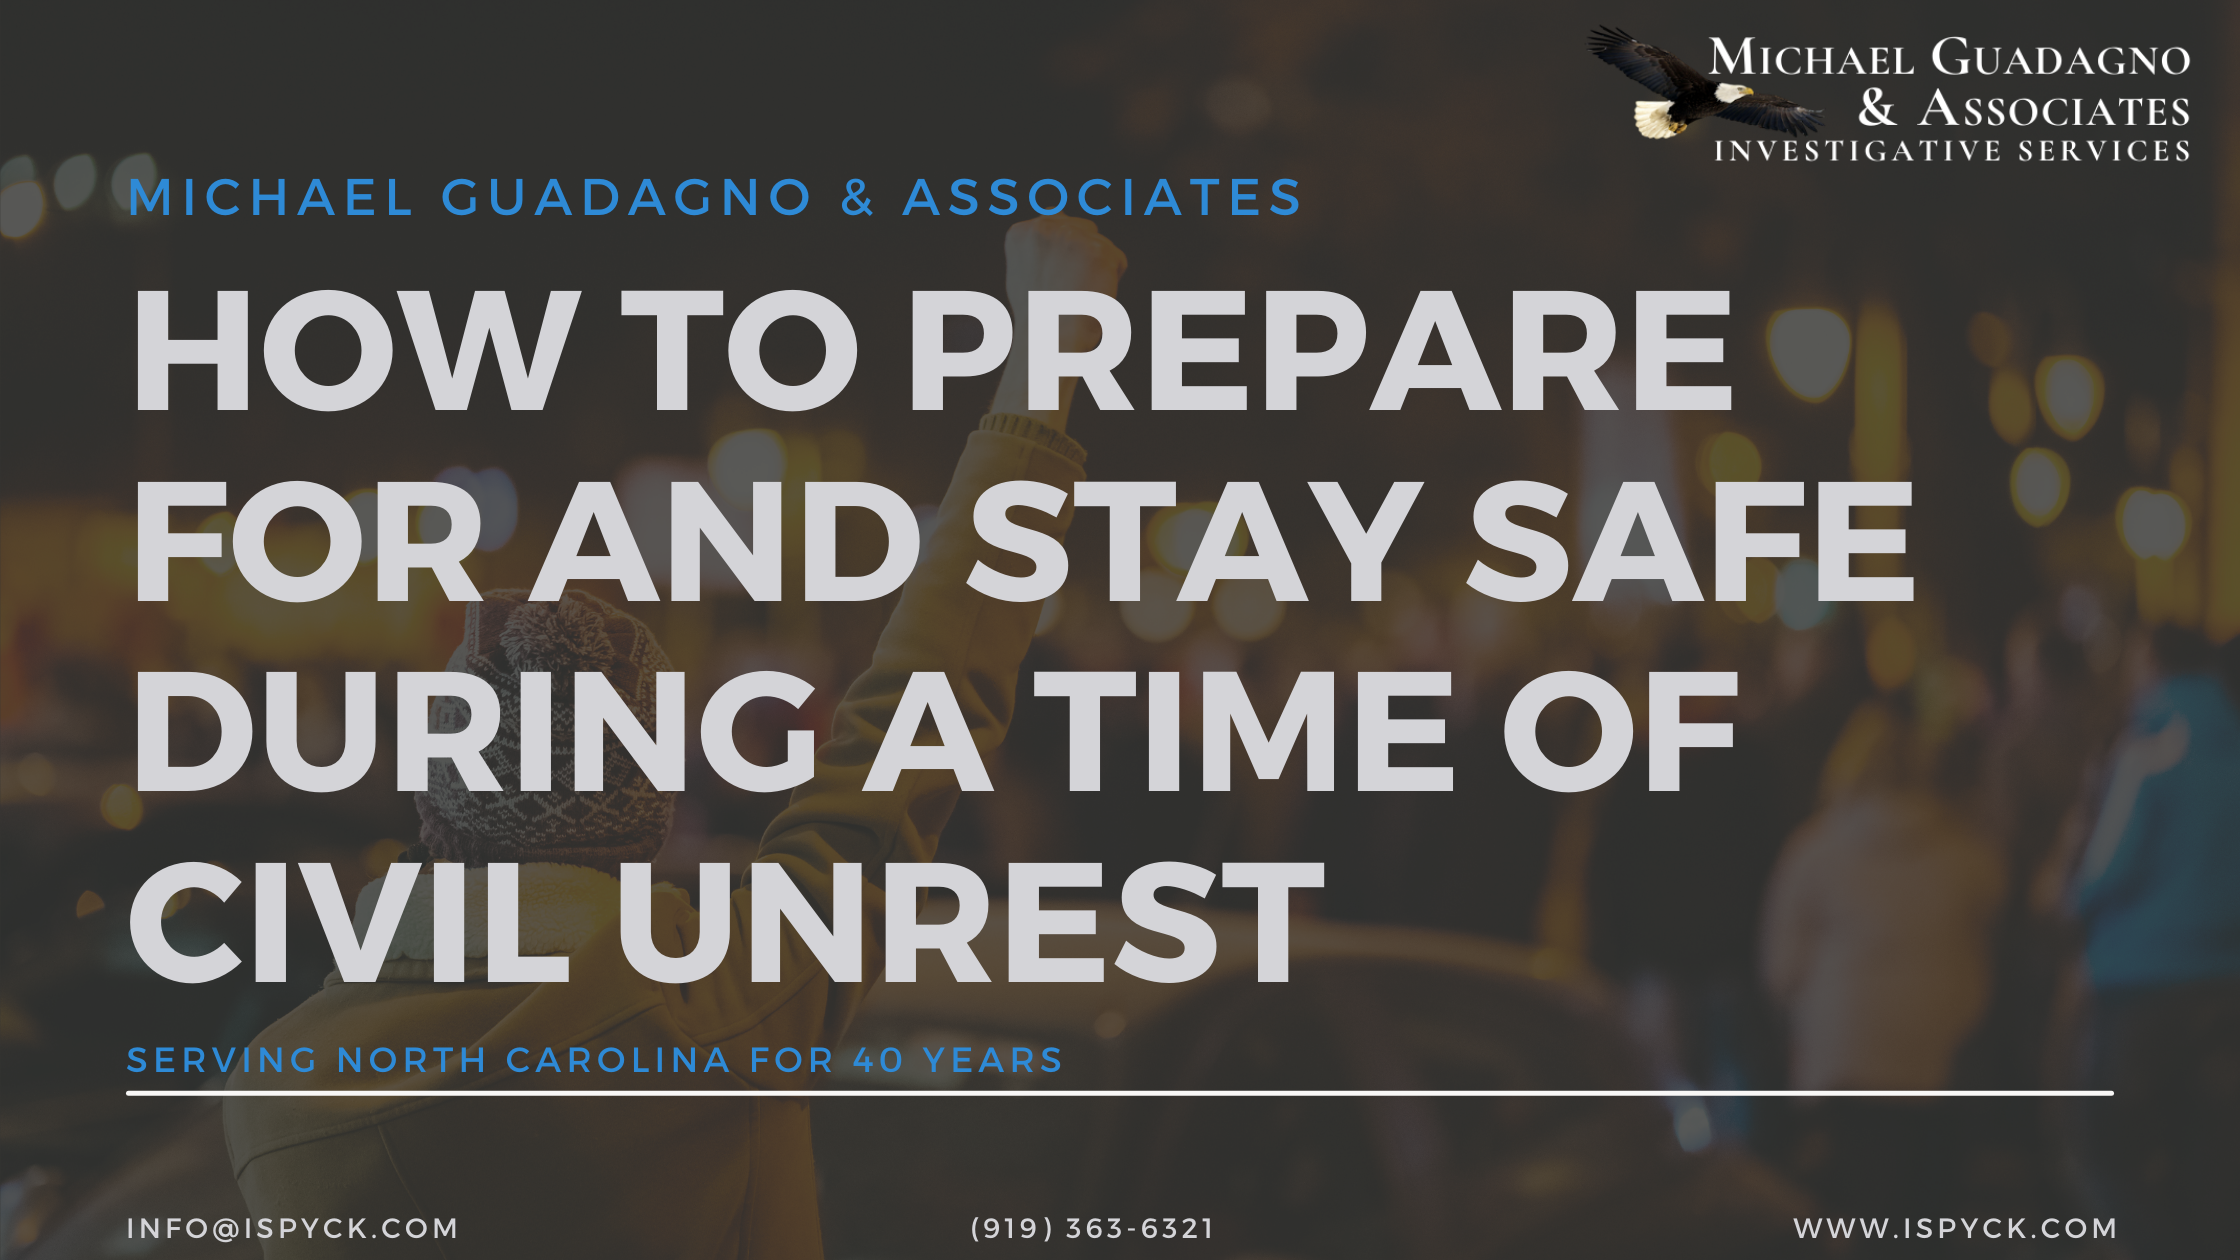 How to Prepare and Stay Safe in a Time of Civil Unrest